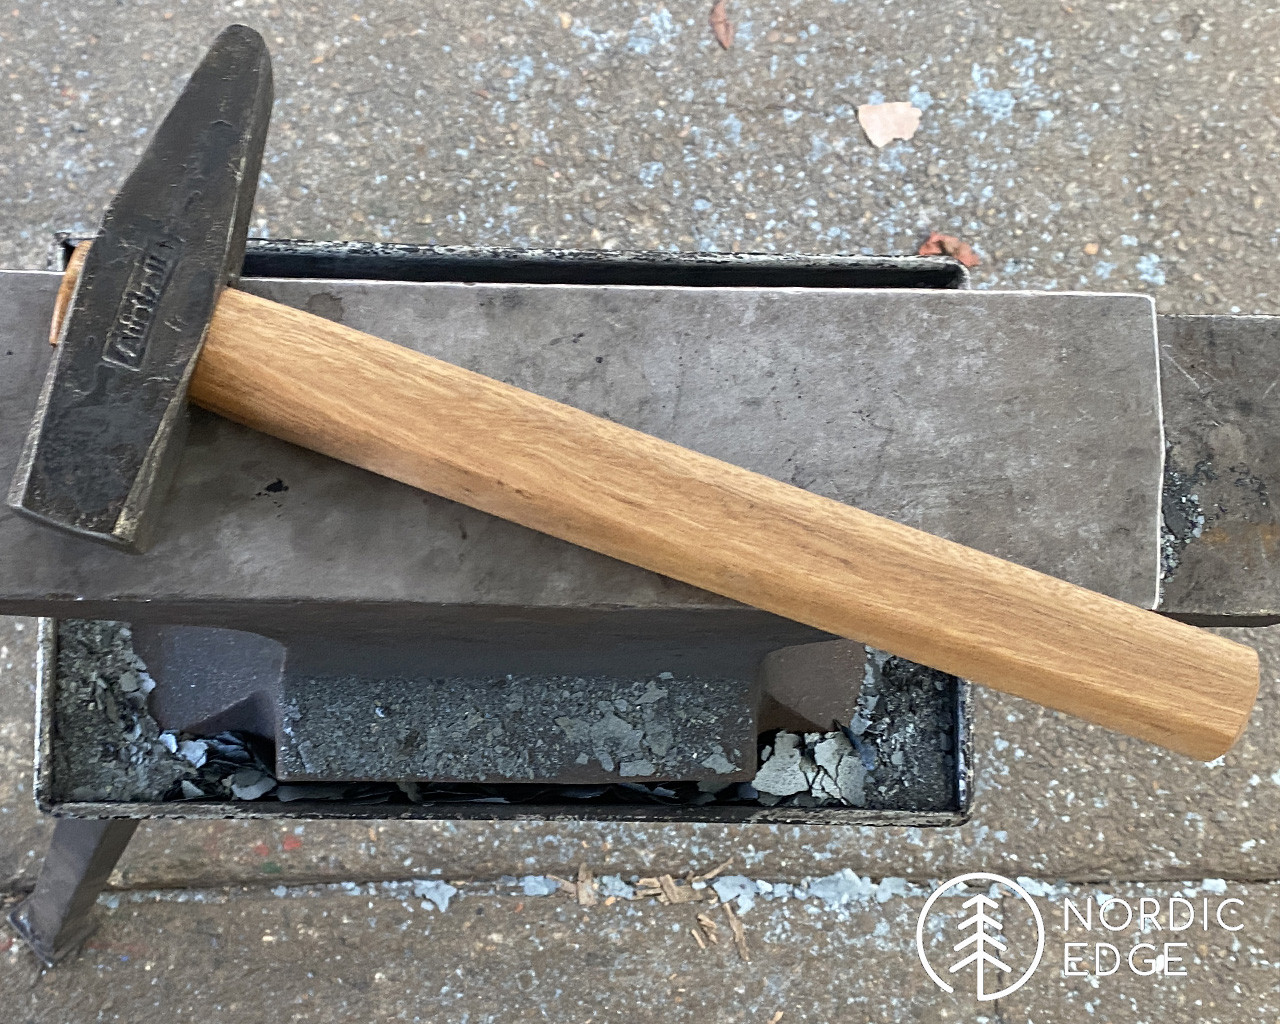 https://cdn11.bigcommerce.com/s-v52r0f6z/images/stencil/1280x1280/products/2305/11016/German-Cross-peen-hammer-2.2lb-plane-old-iron-spotted-gum-handle-2-nordicedge.com.au__24183.1670474773.jpg?c=2?imbypass=on